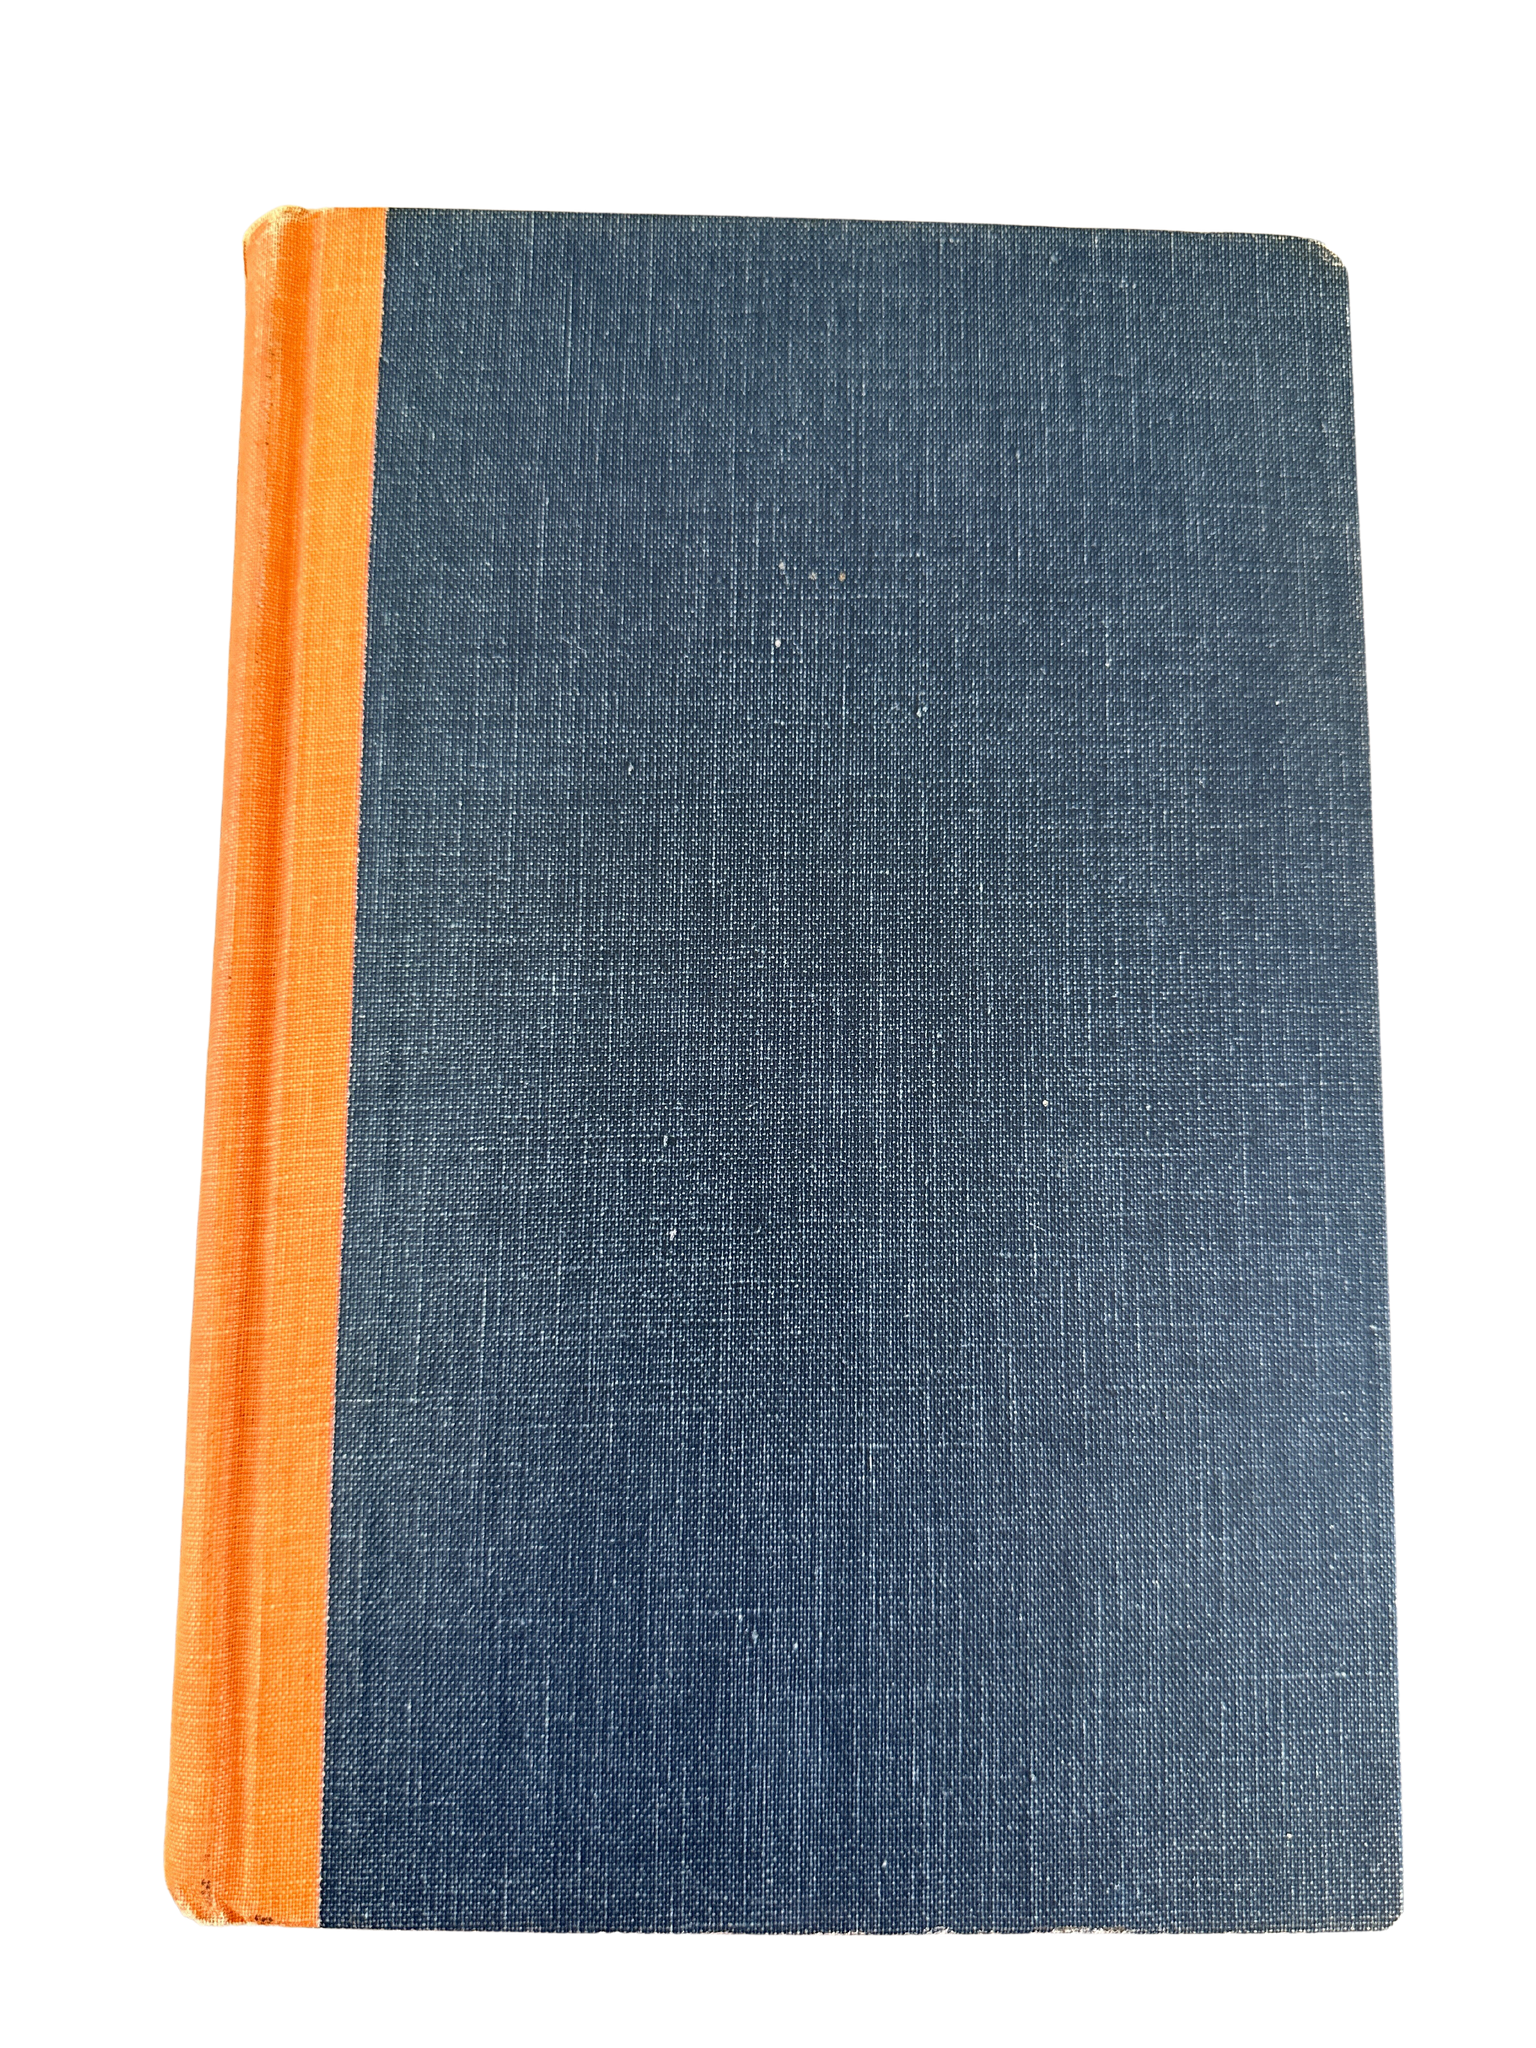 1953 The Complete Works of OHenry Doubleday